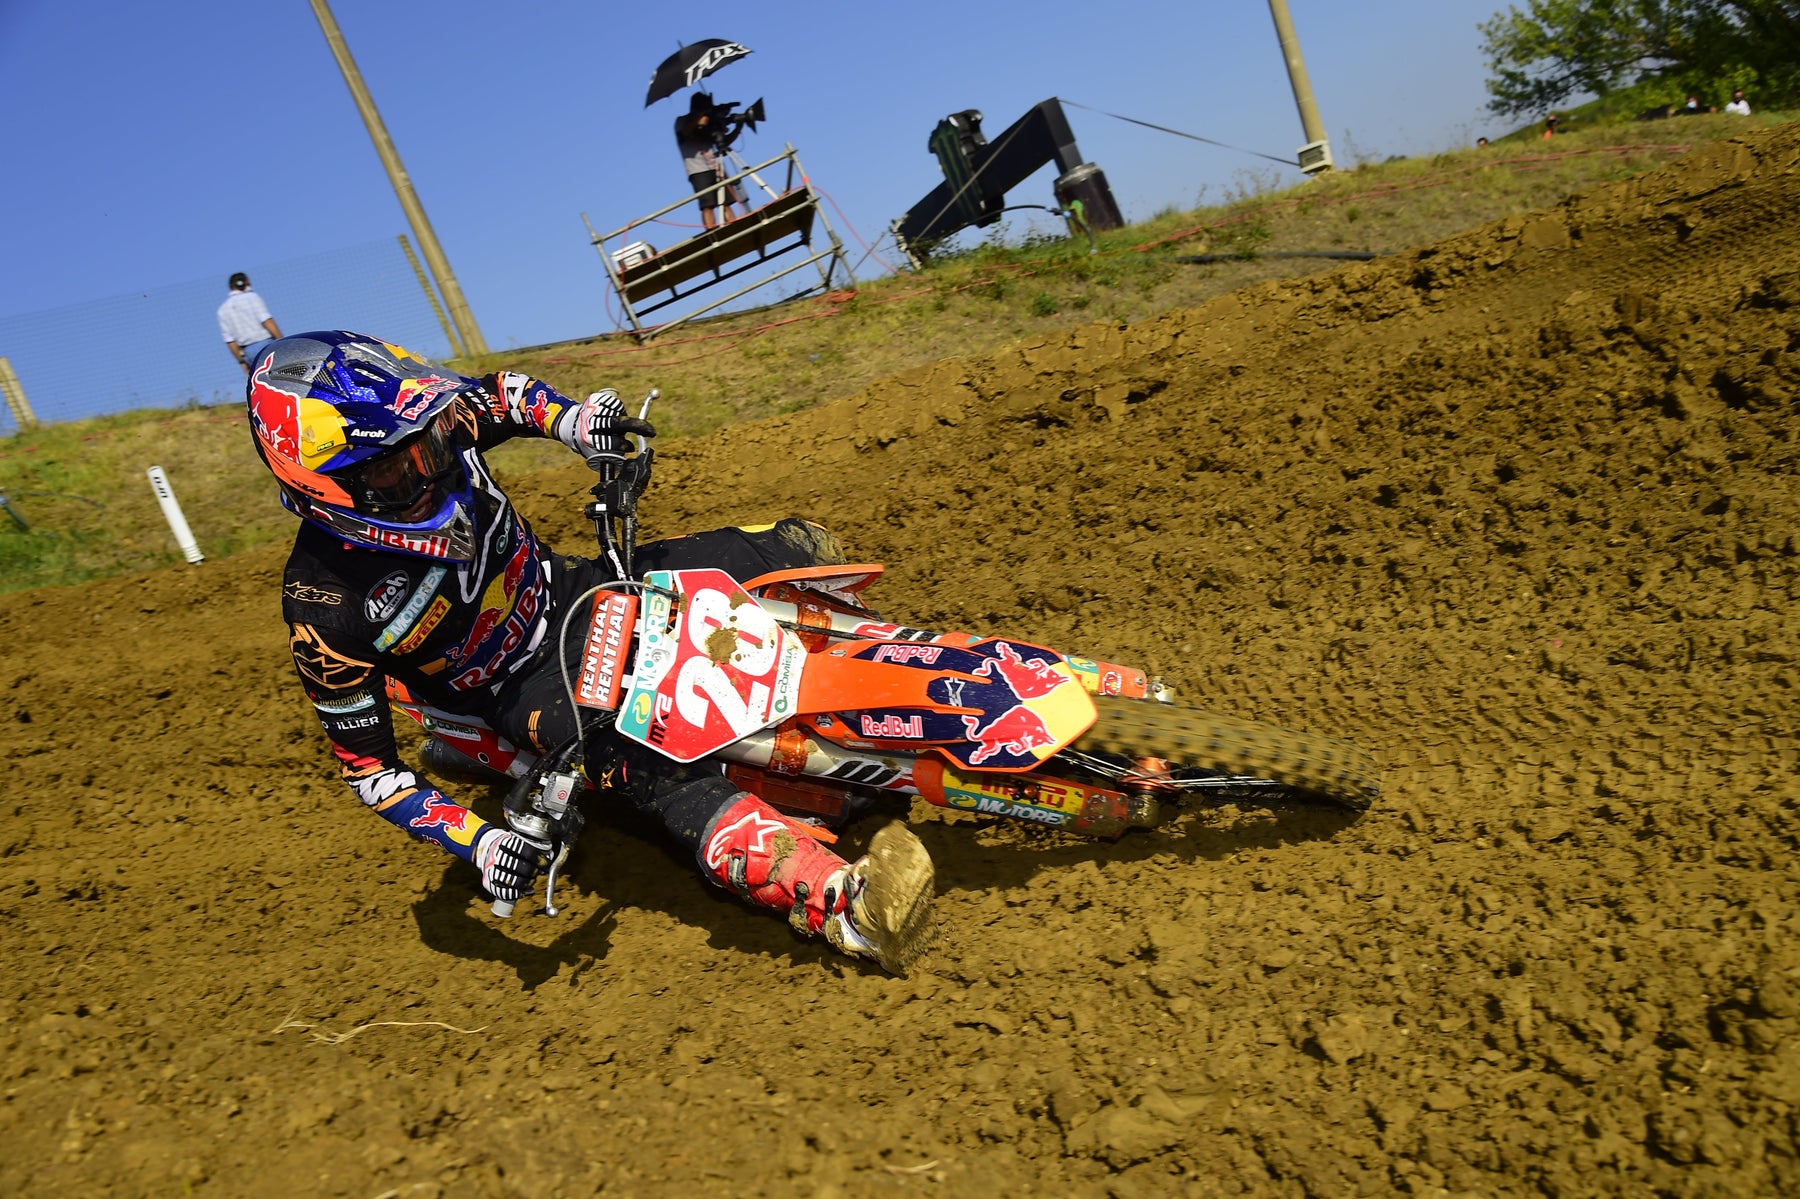 VIALLE CLAIMS EPIC BACK-TO-BACK MX2 OVERALL WINS IN FAENZA